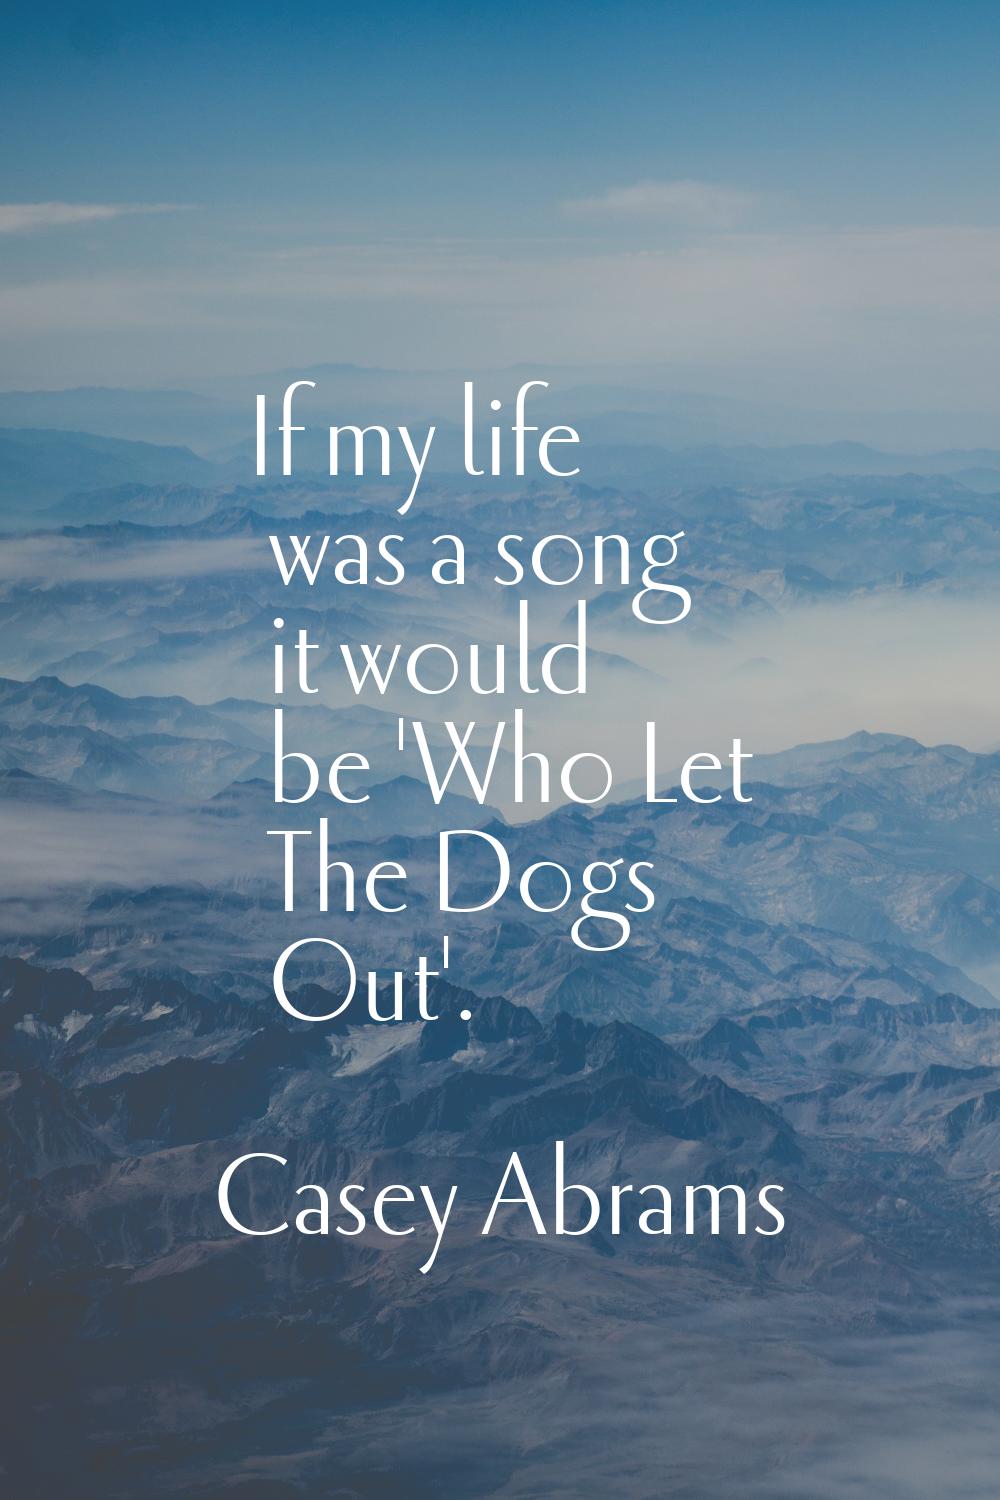 If my life was a song it would be 'Who Let The Dogs Out'.